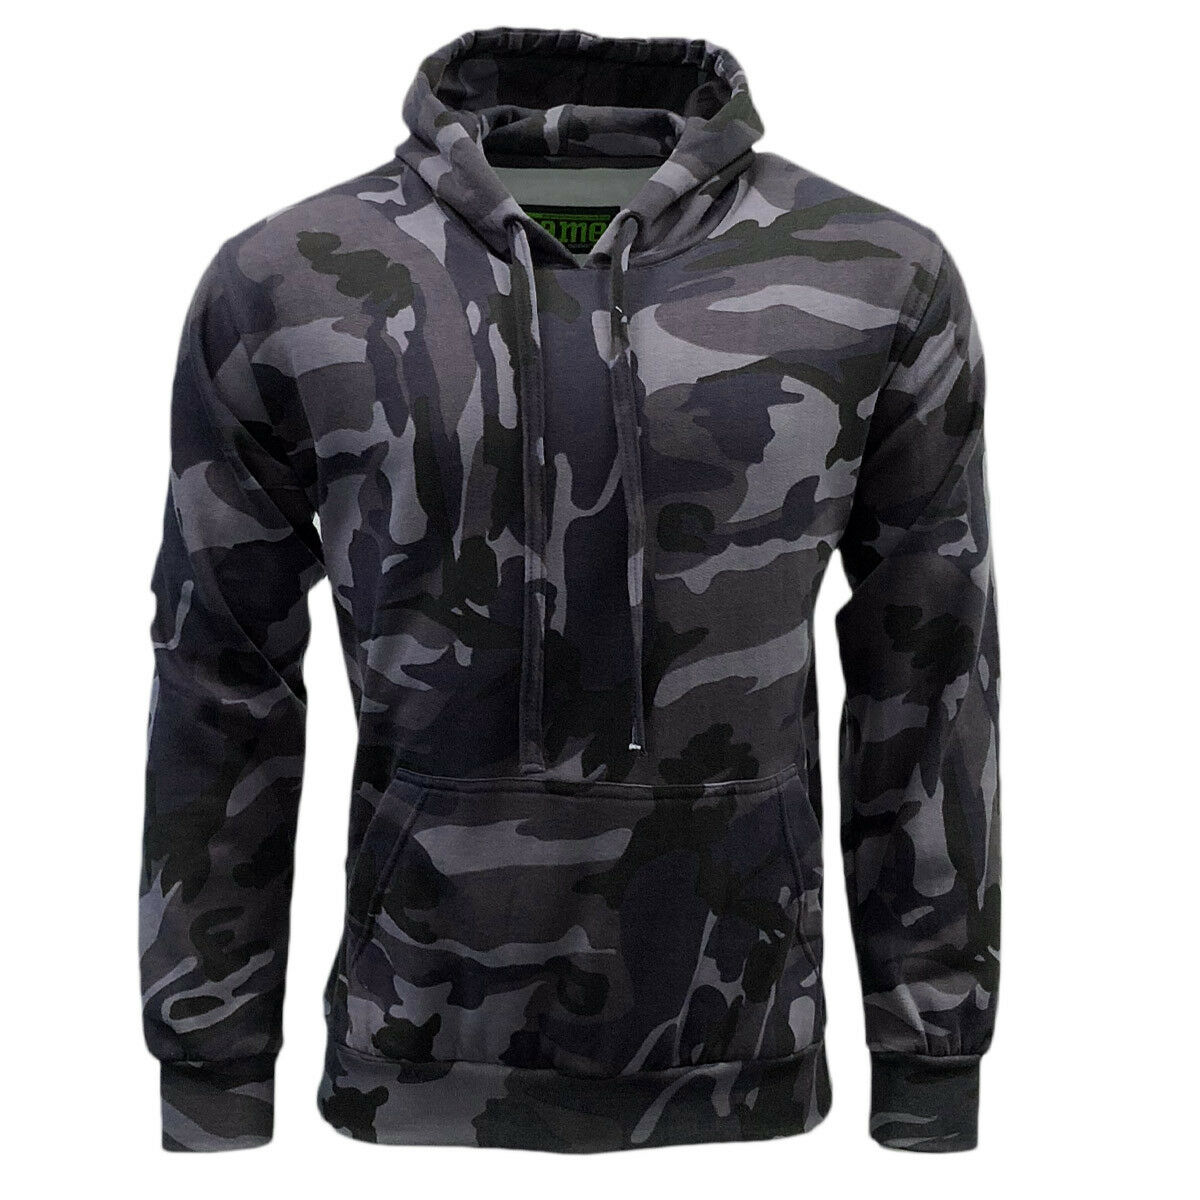 Men's Game Military Camouflage Army Hoody